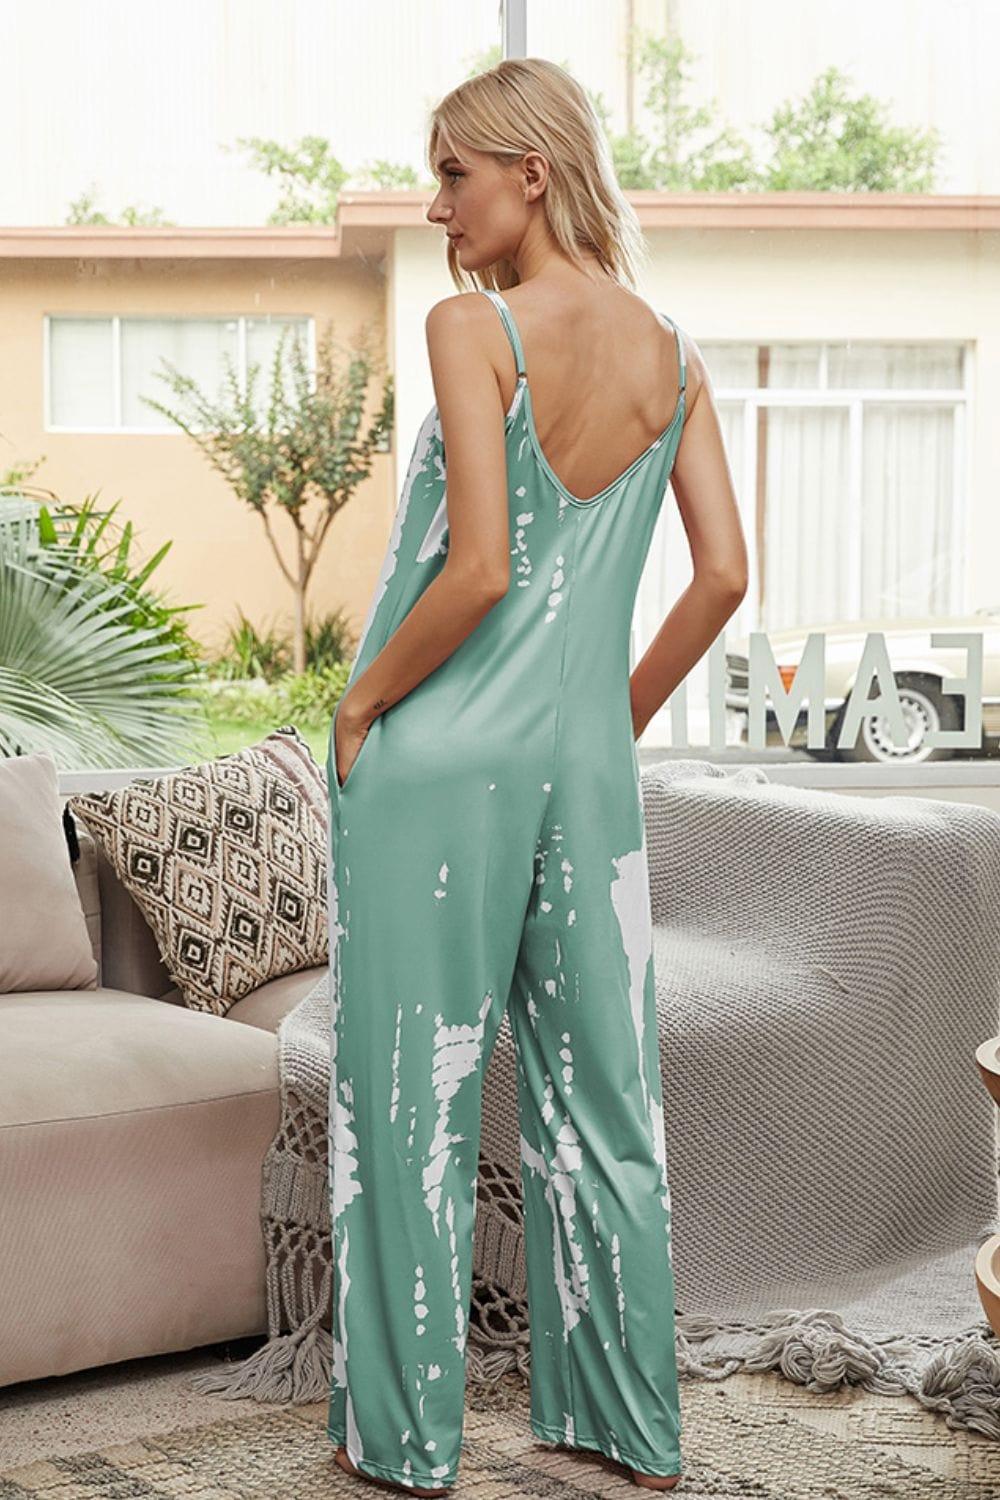 White Label Jumpsuits & Rompers Tie-Dye Spaghetti Strap Jumpsuit with Pockets